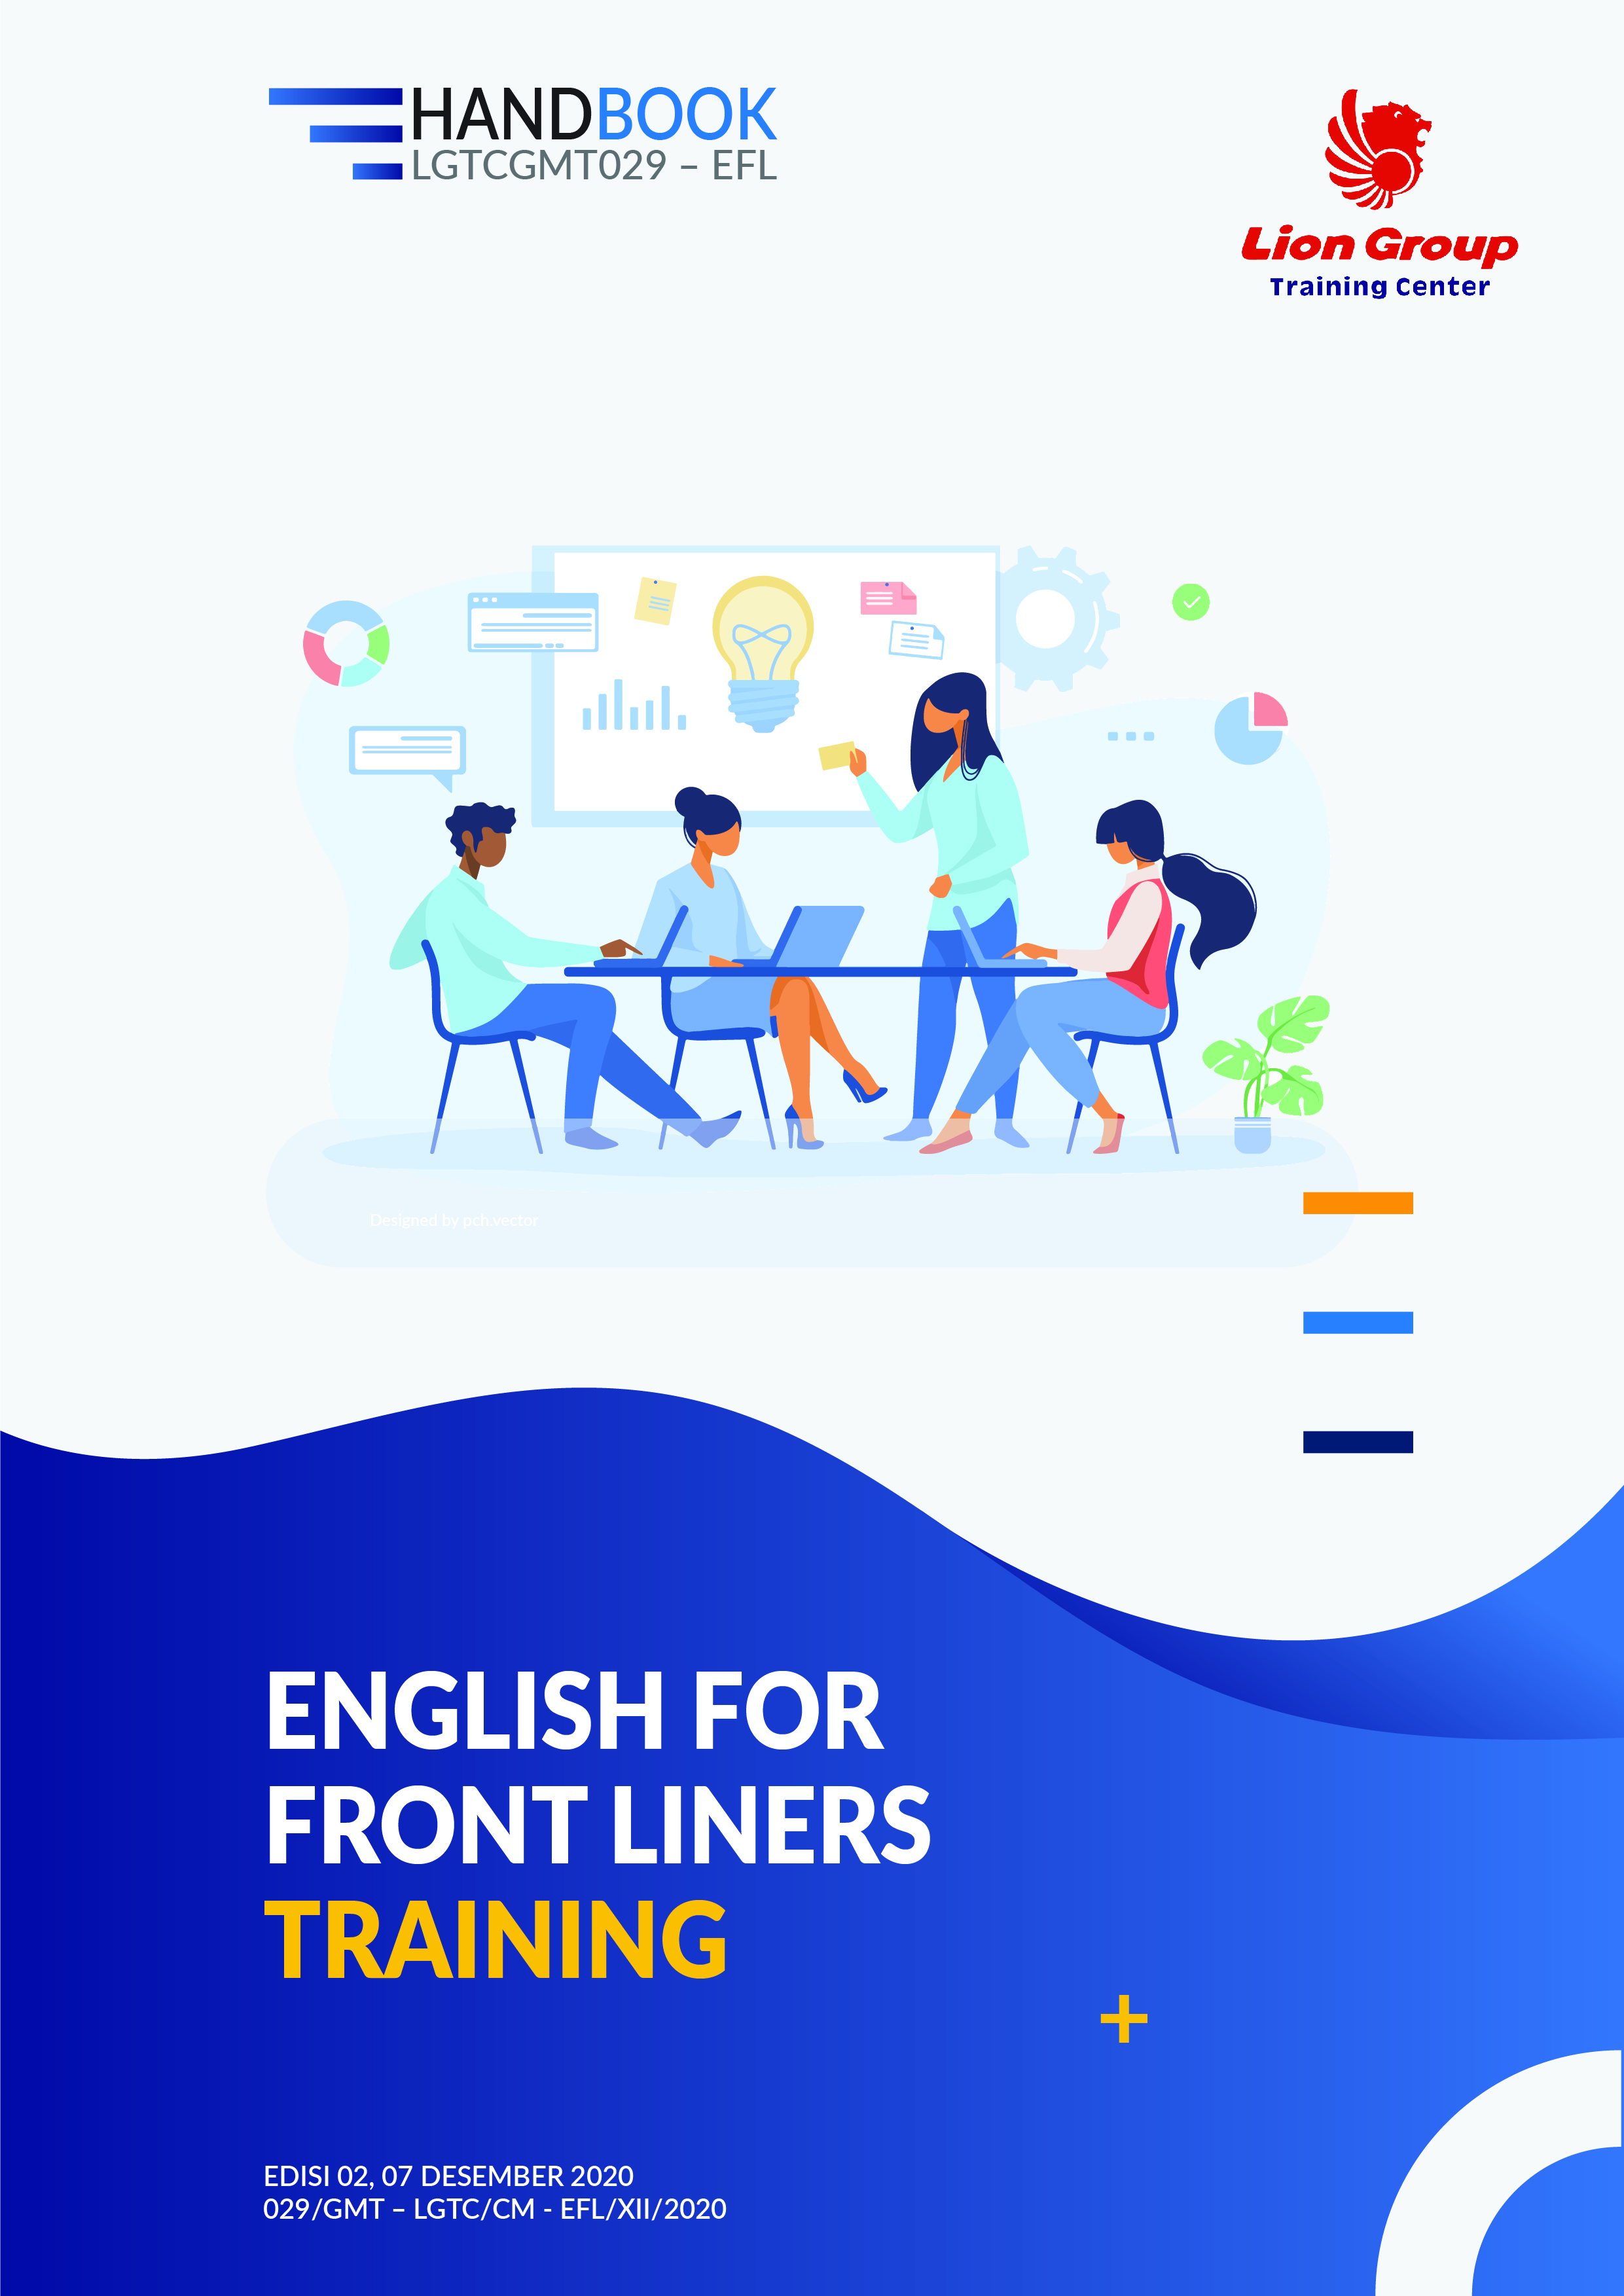 ENGLISH FOR FRONT LINERS TRAINING